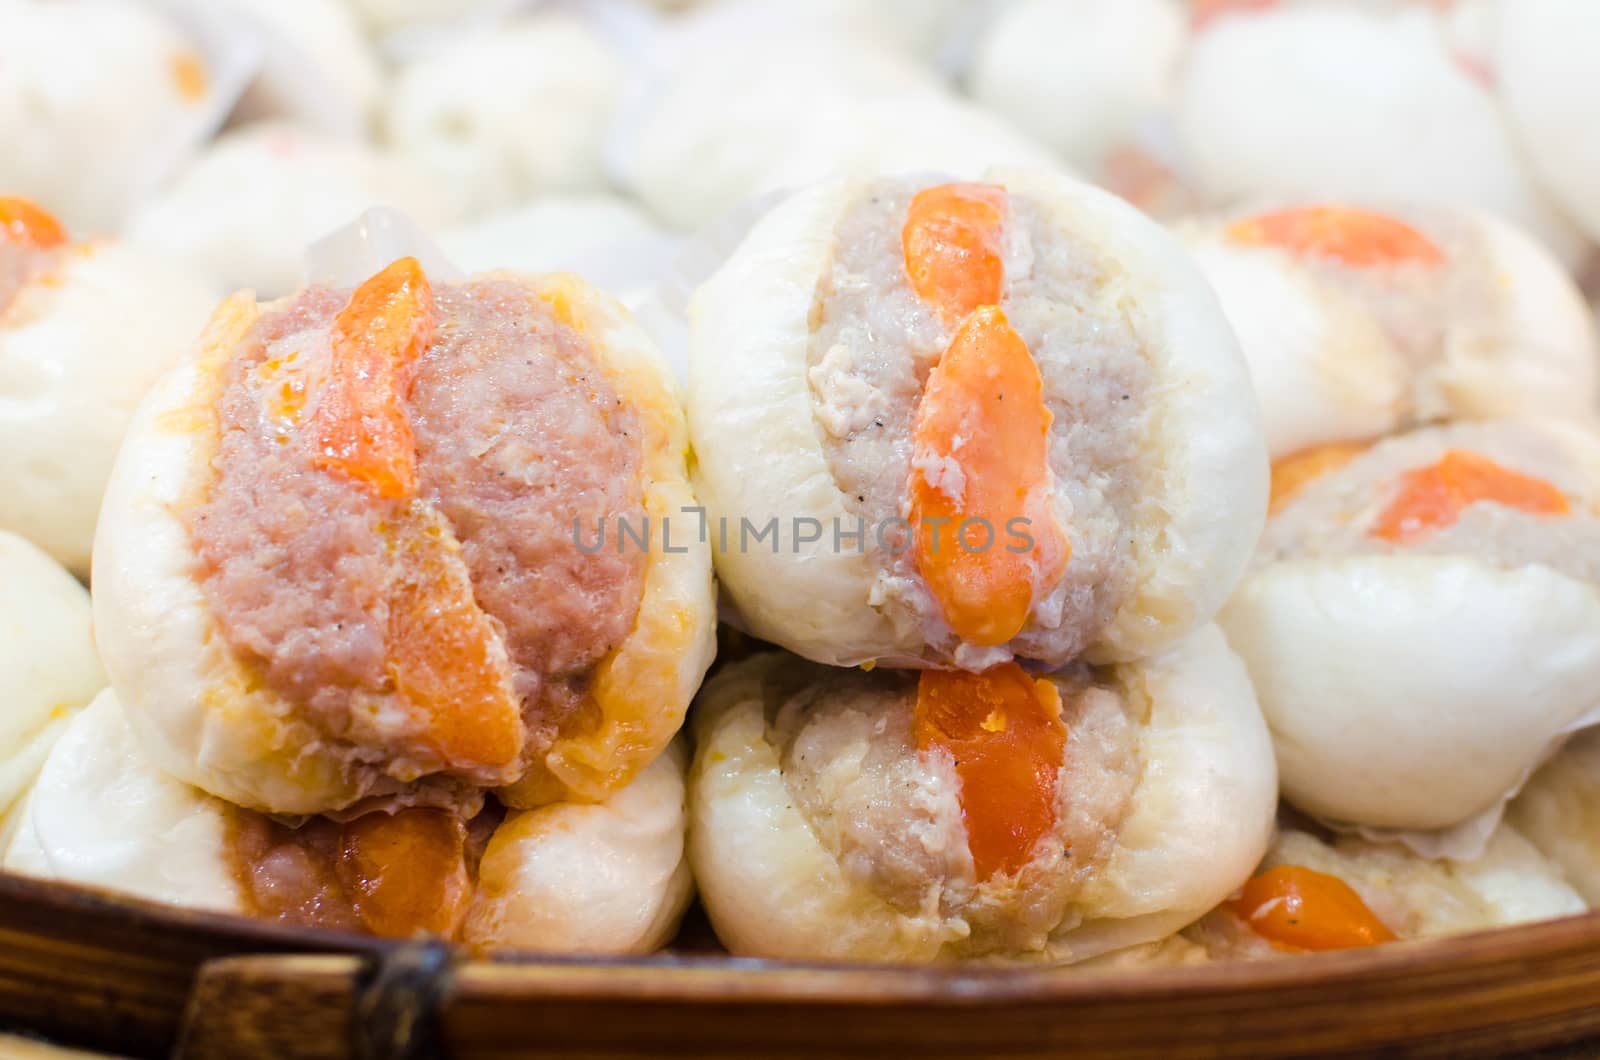 Chinese steamed bun stuffed with  pork and yolk. by nop16